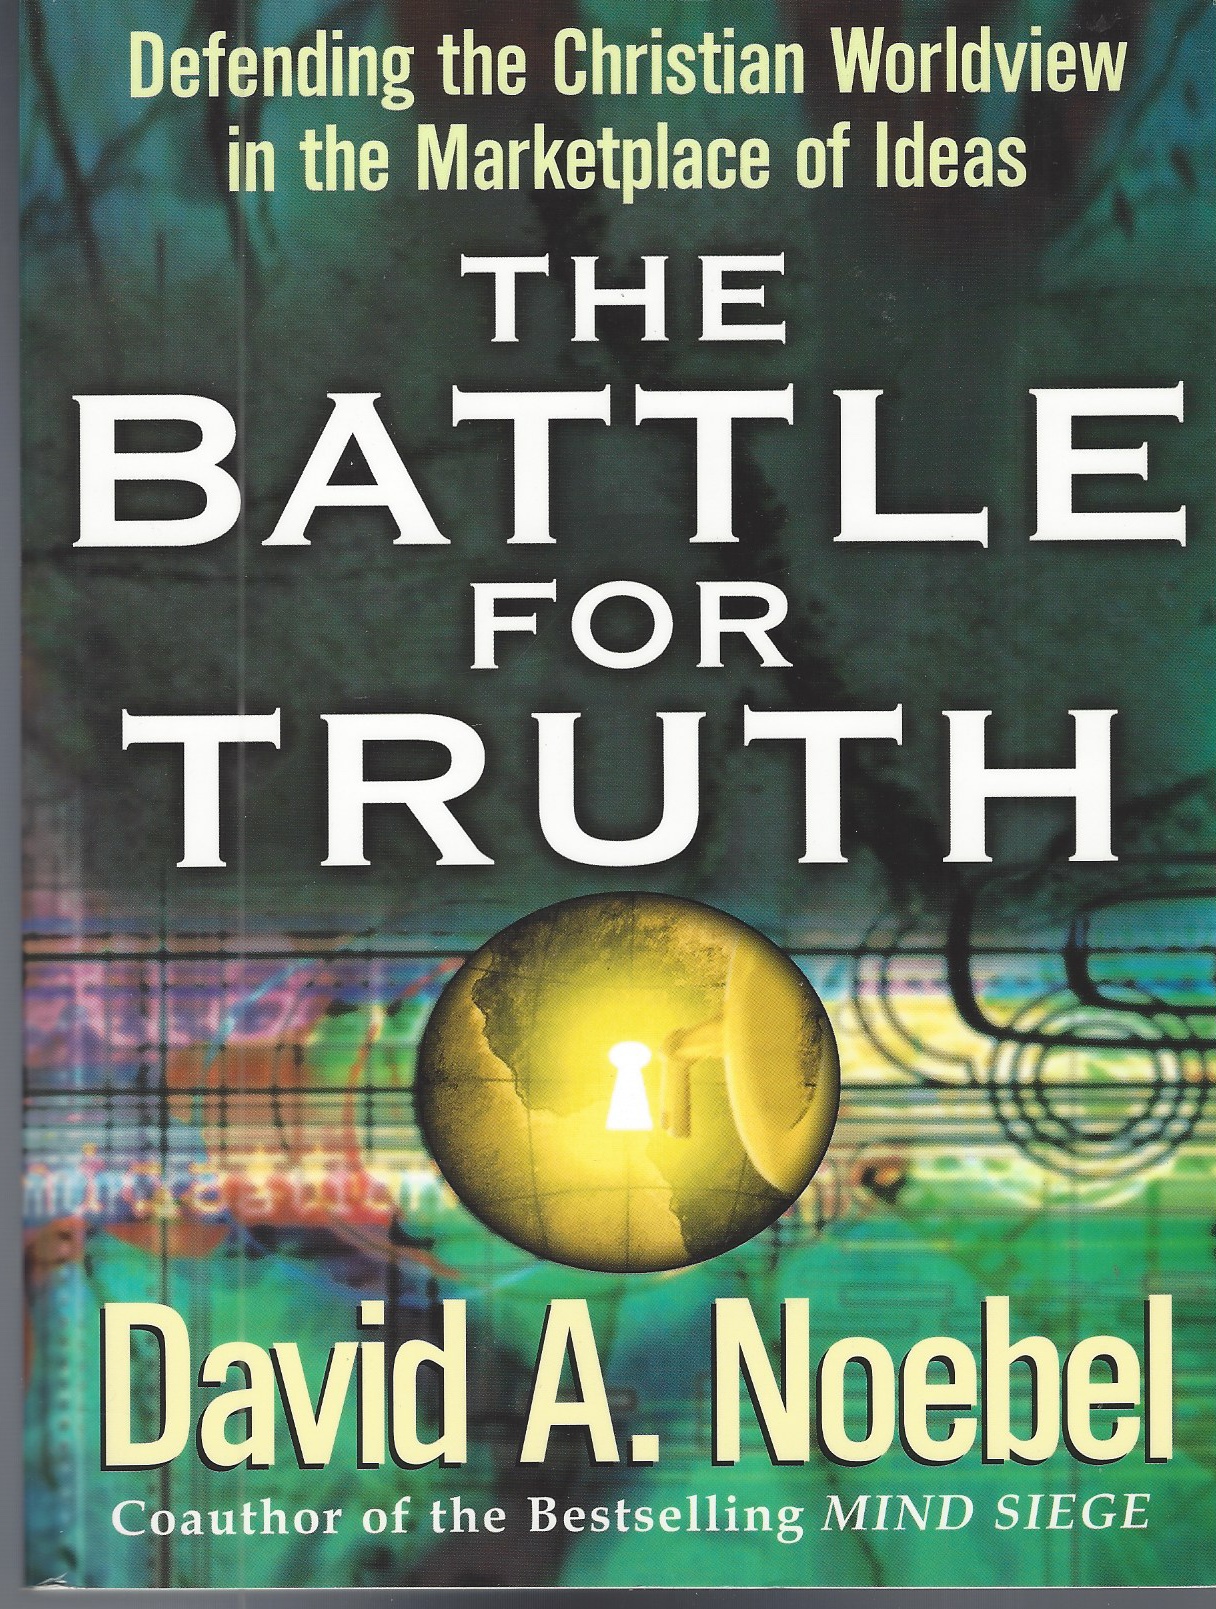 NOEBEL DAVID A. - Battle for Truth: Defending the Christian Worldview in the Marketplace of Ideas